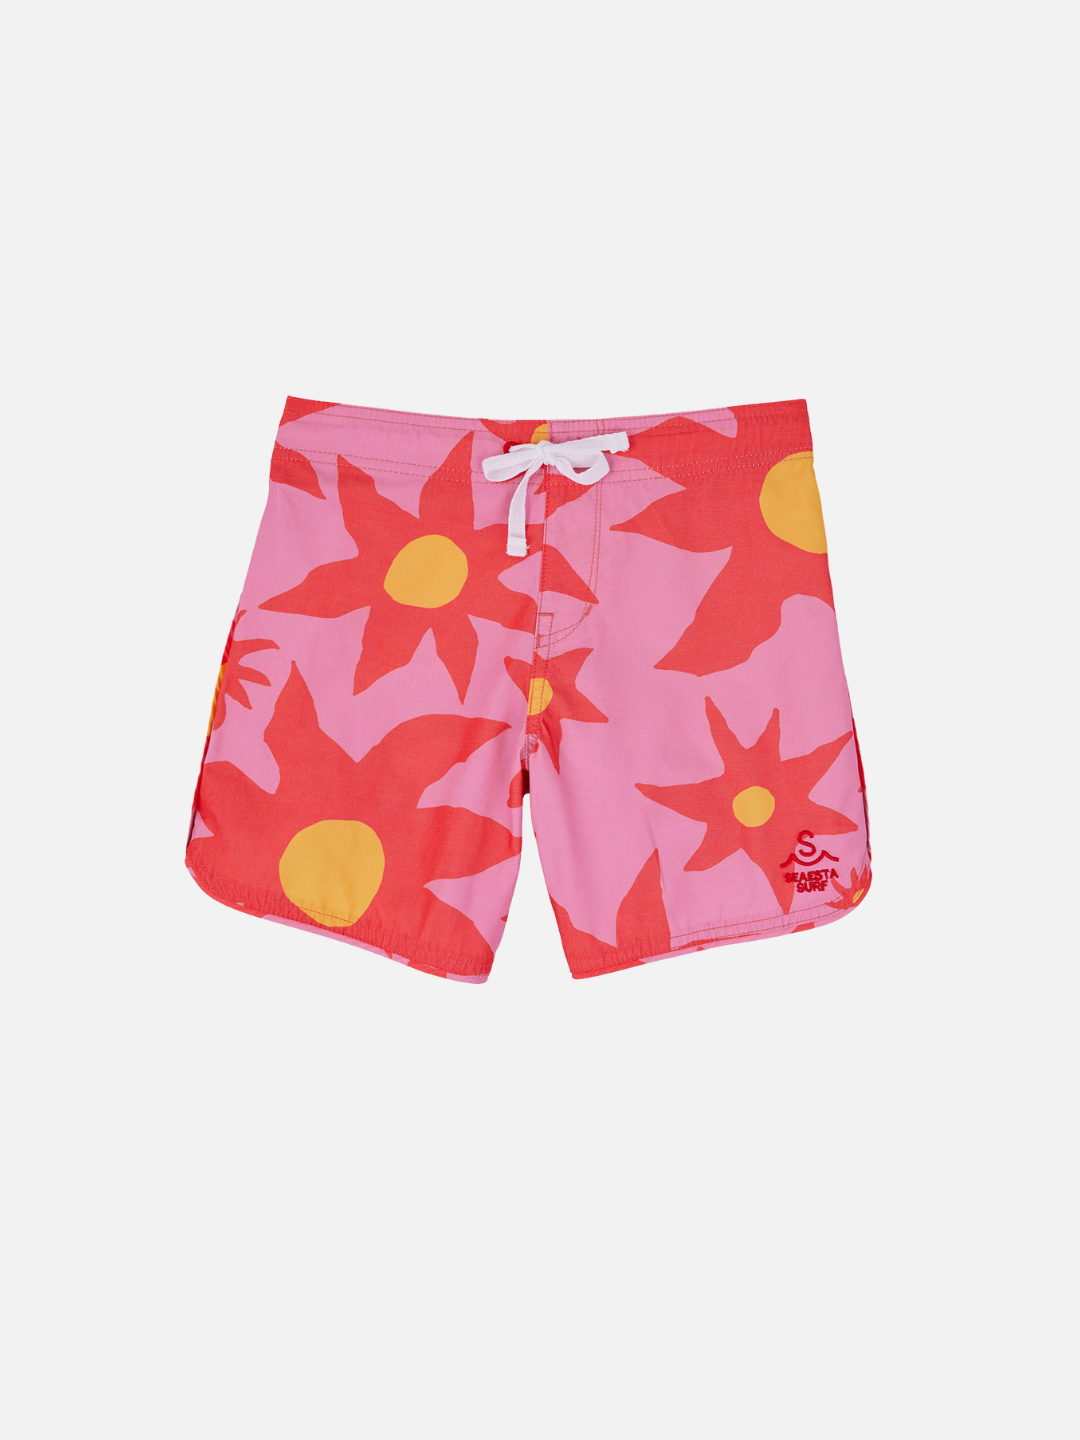 A front view of the kid's Siesta Scallop Retro Flare Boardshort, highlighting the adjustable waistband white, Saesta Swim logo on the left in pink. The design features large red flowers. 